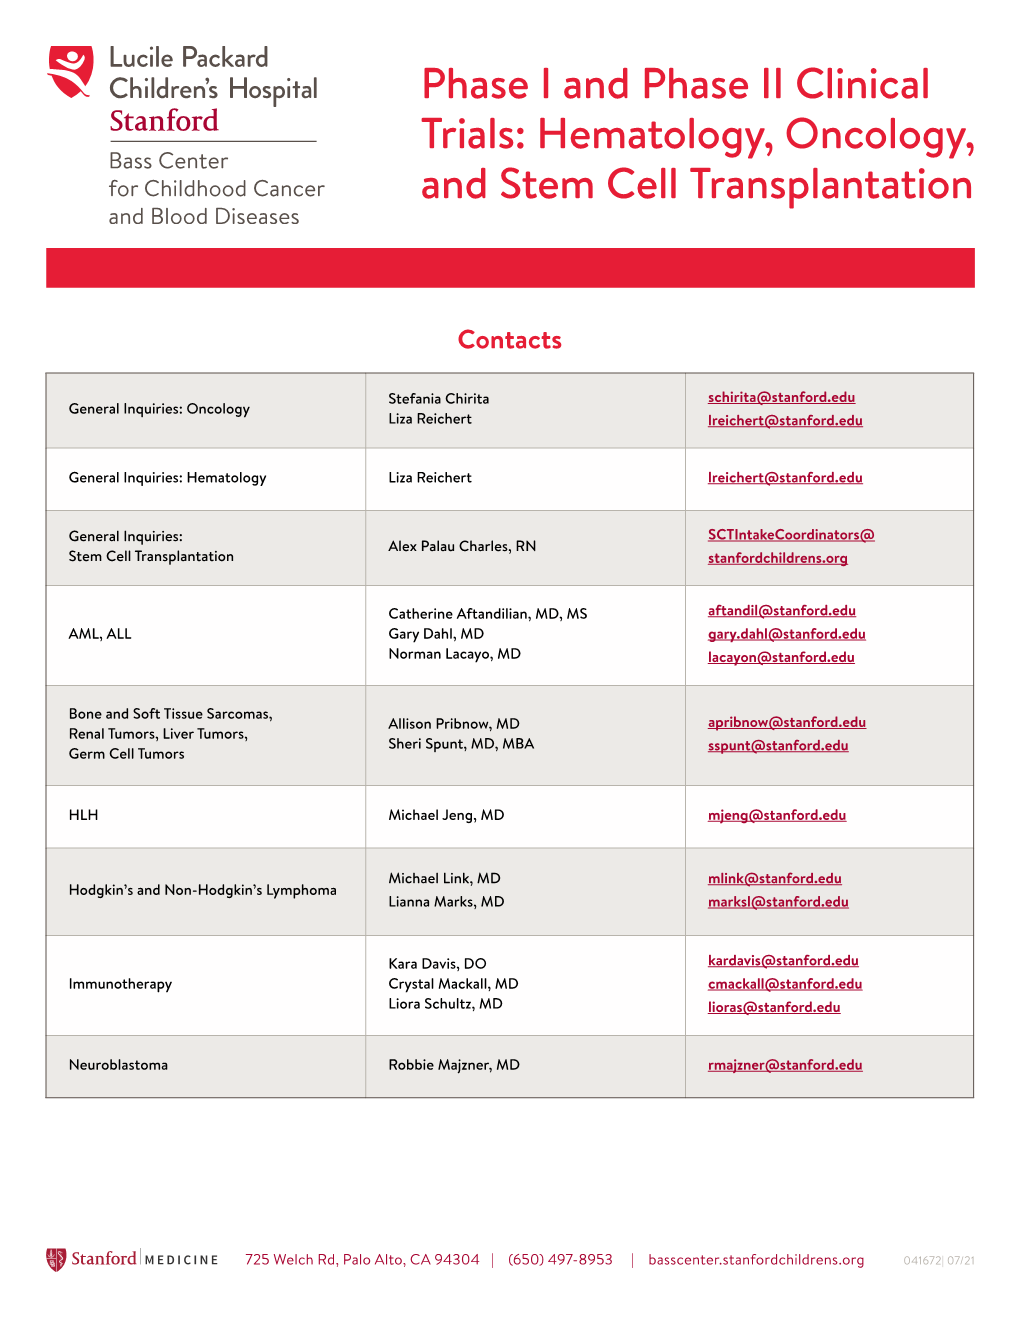 Phase I and Phase II Clinical Trials: Hematology, Oncology, and Stem Cell Transplantation